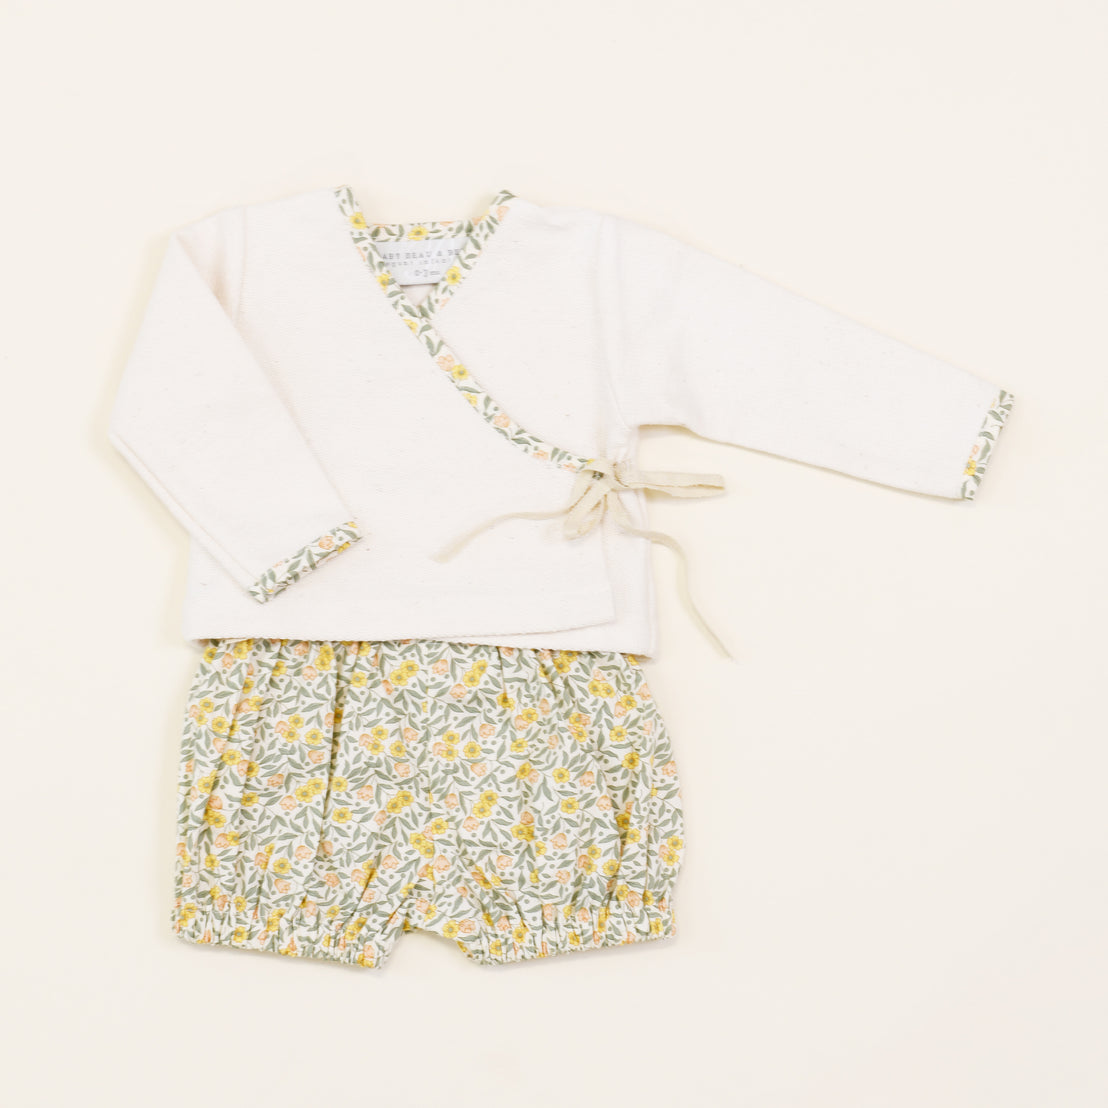 A Petite Fleur Wrap Top & Bloomers with vintage-inspired floral trim and matching floral shorts displayed on a plain background.